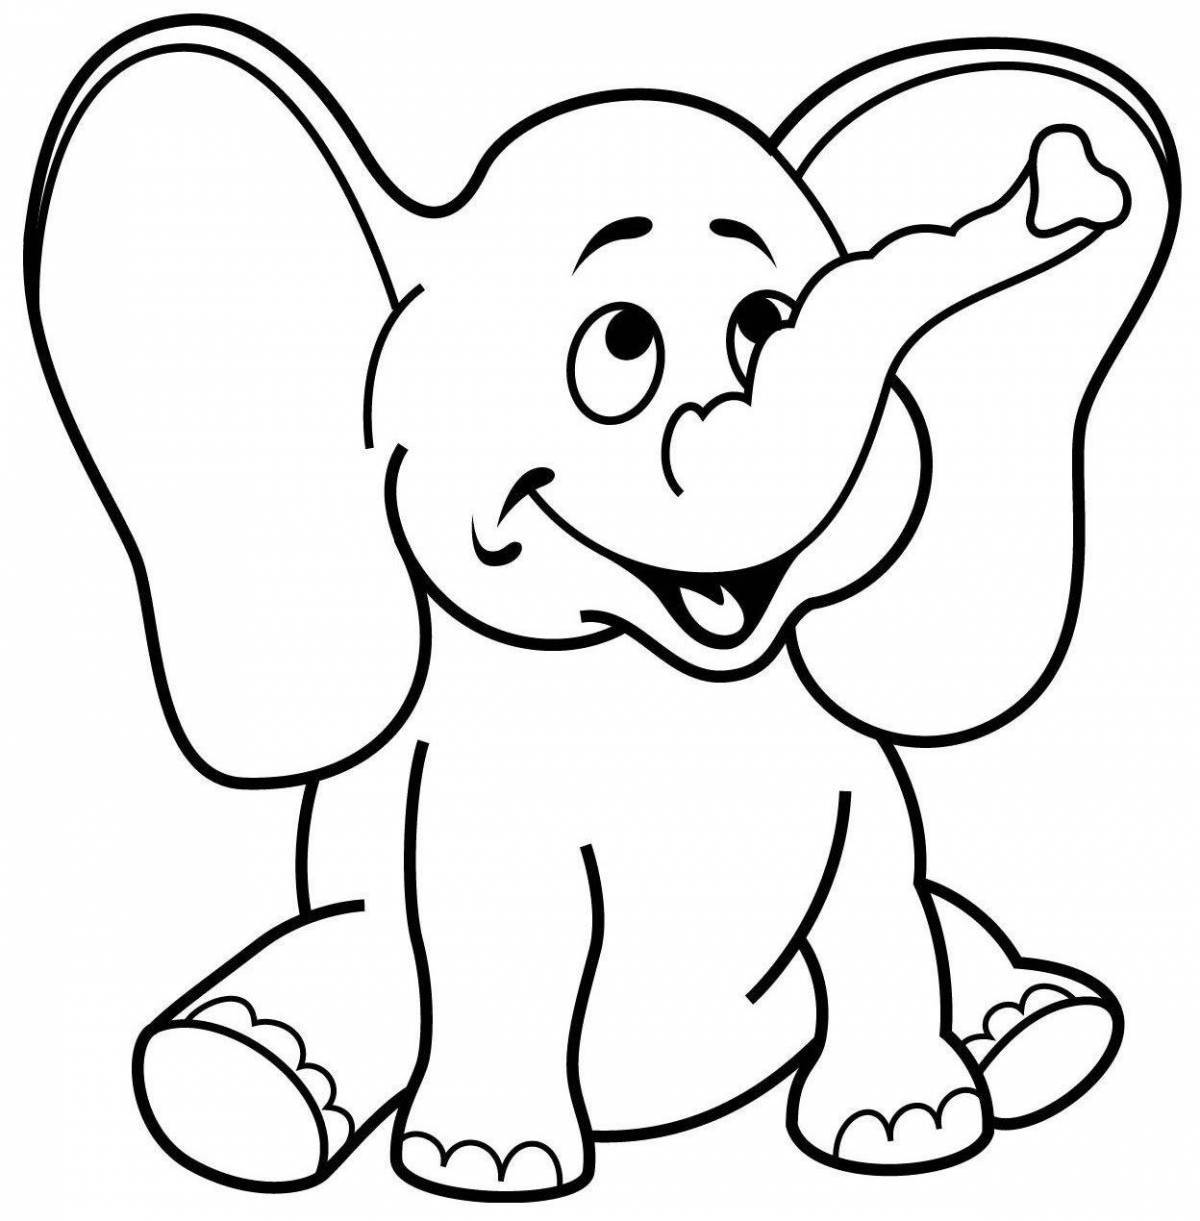 Glorious elephant coloring pages for children